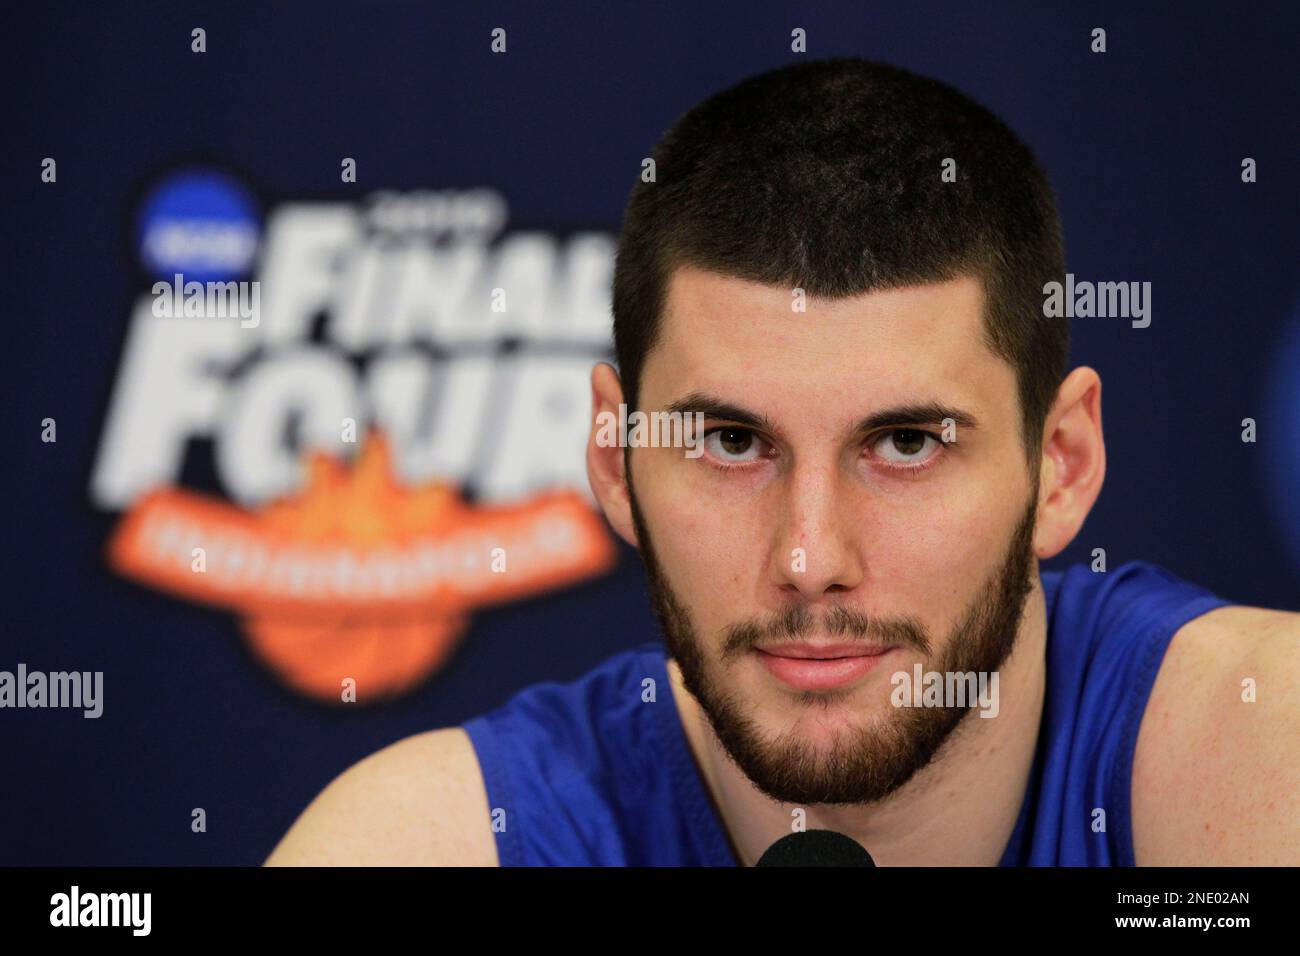 Duke Blue Devils' Brian Zoubek during an interview session for the NCAA Final Four college basketball tournament Thursday, April 1, 2010, in Indianapolis. (AP Photo/Michael Conroy) Stock Photo